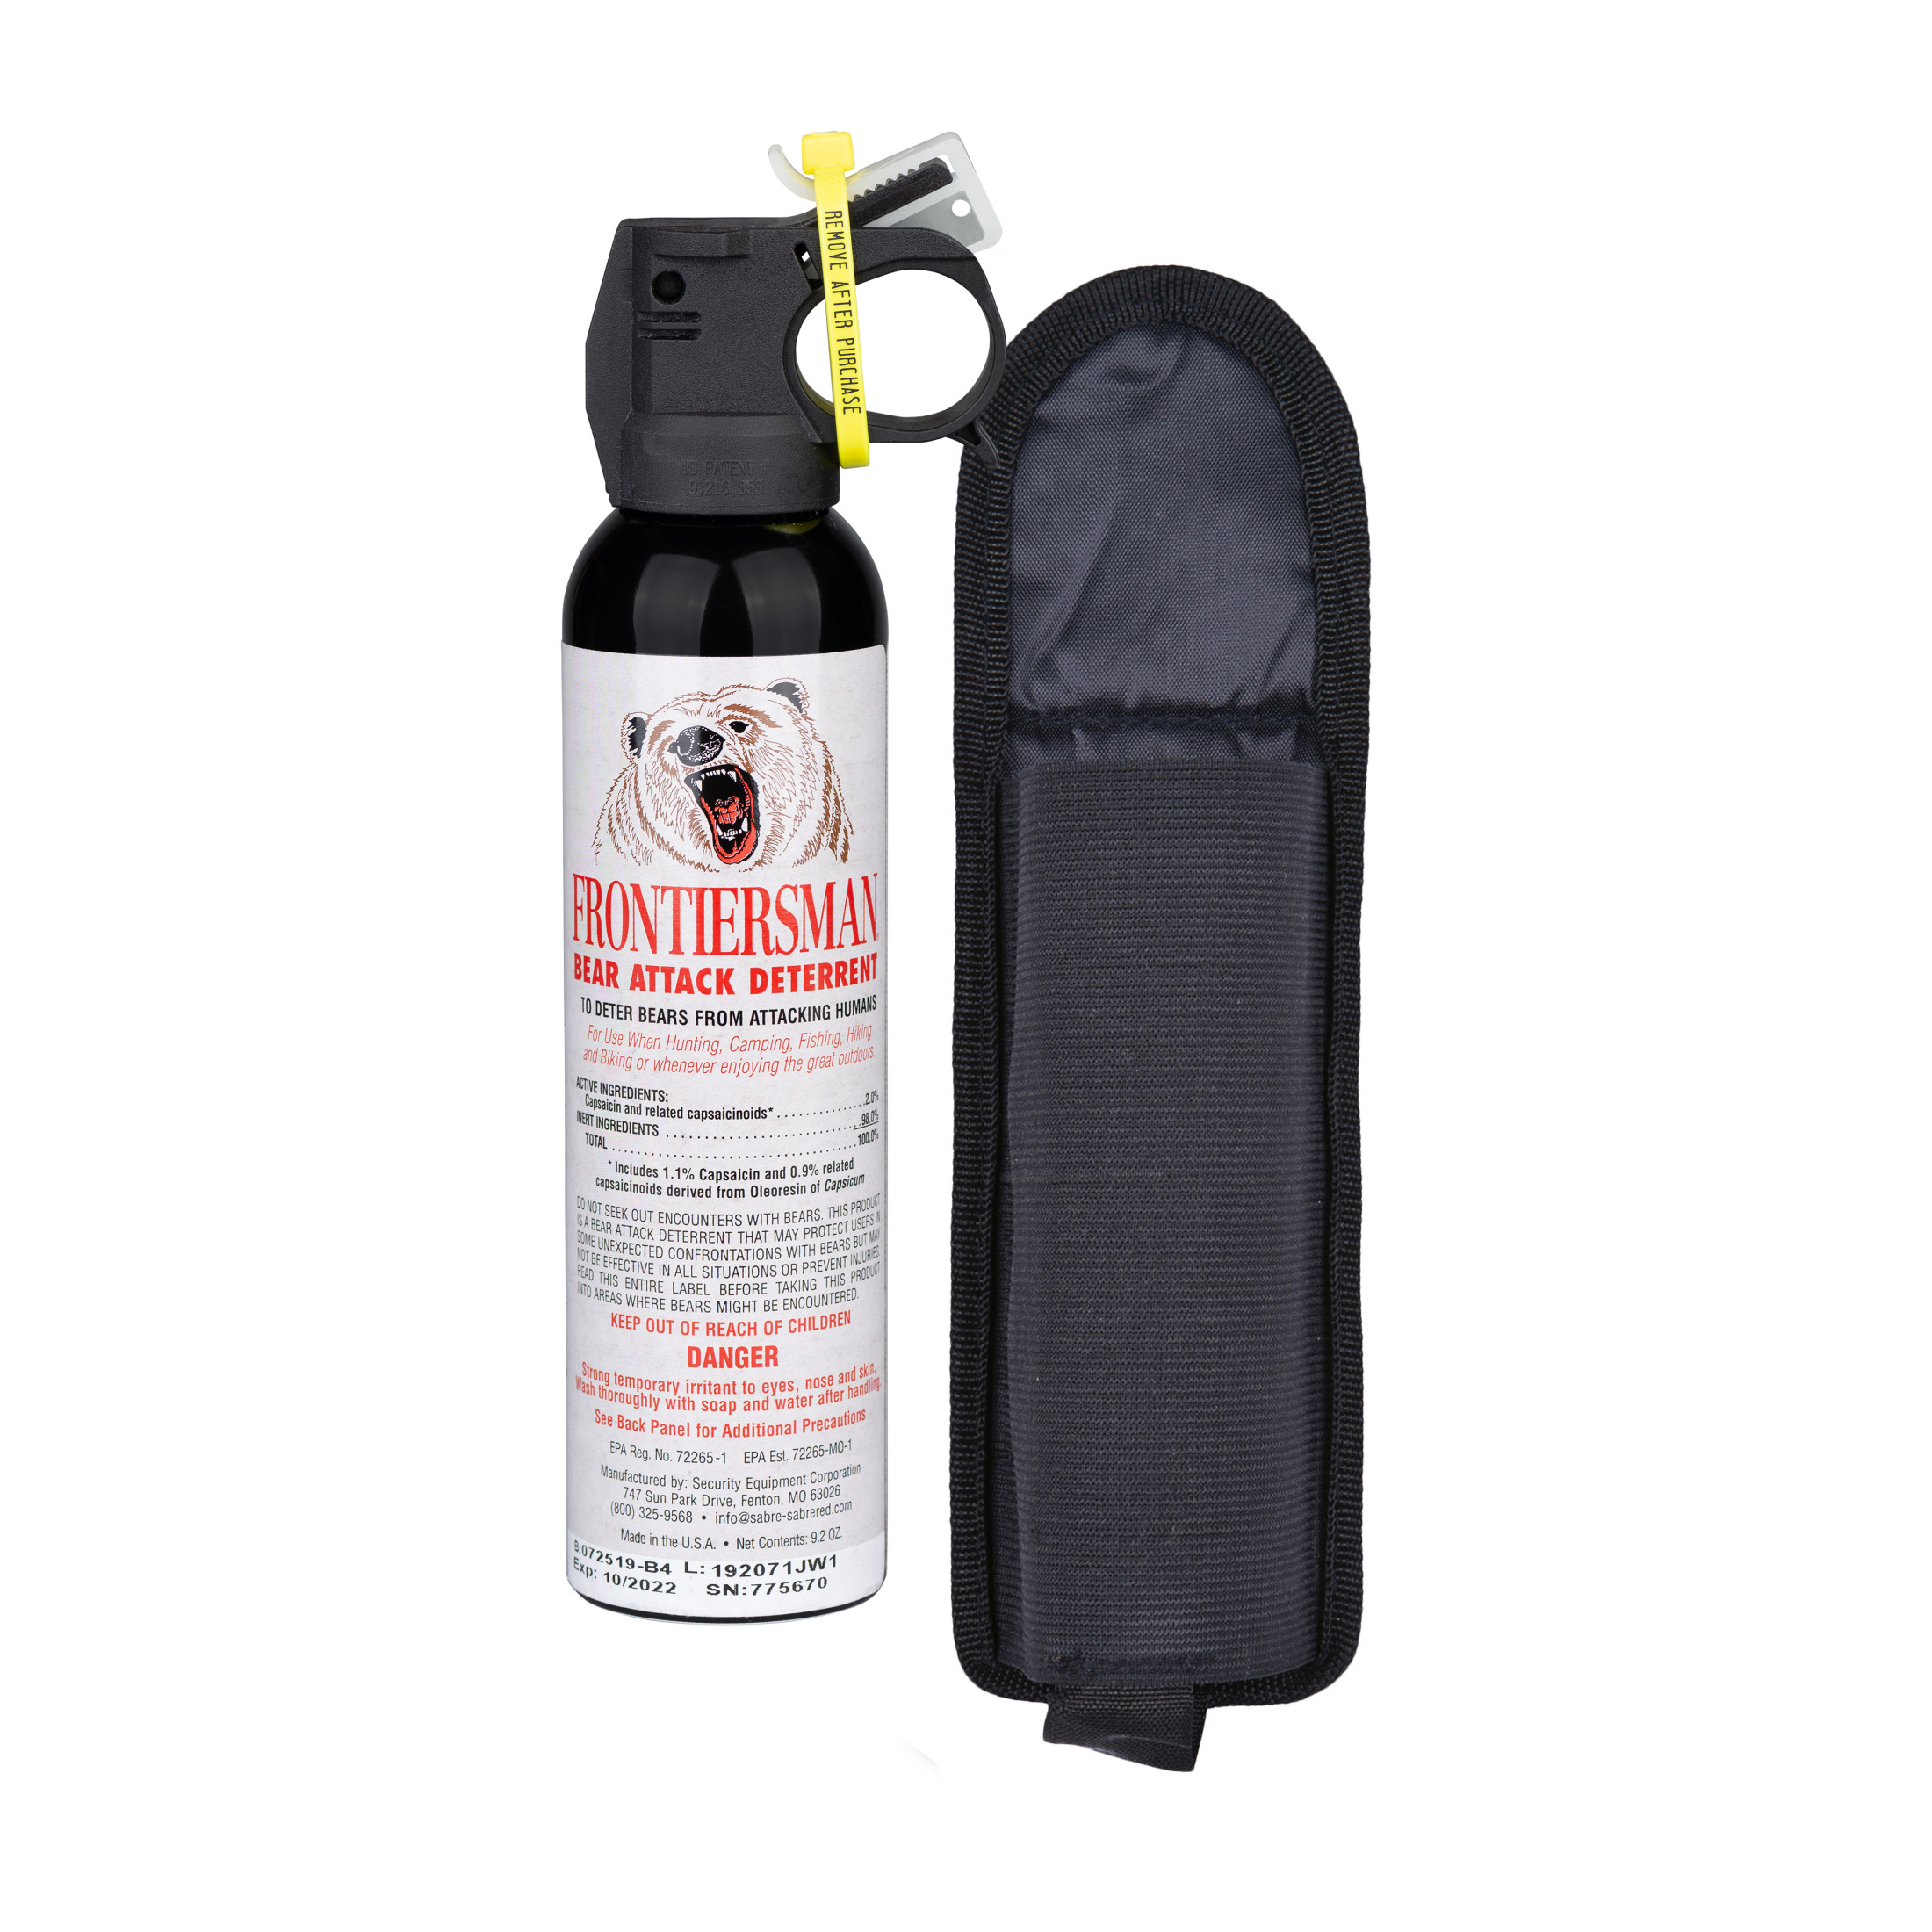 SABRE Frontiersman 9.2 oz Bear Spray with Belt Holster, White, 9.5 in. - image 1 of 12